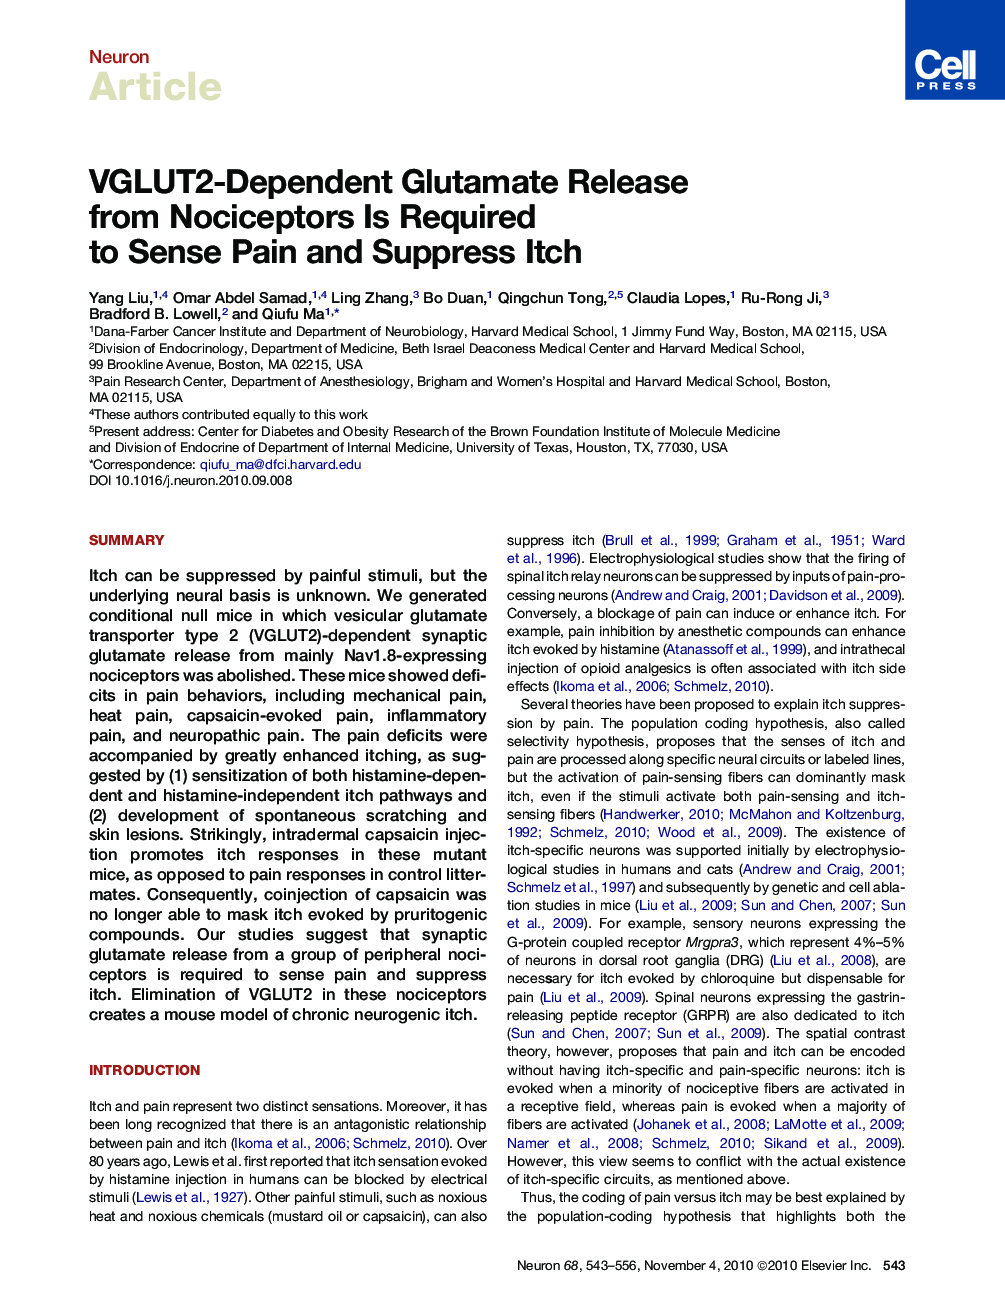 VGLUT2-Dependent Glutamate Release from Nociceptors Is Required to Sense Pain and Suppress Itch